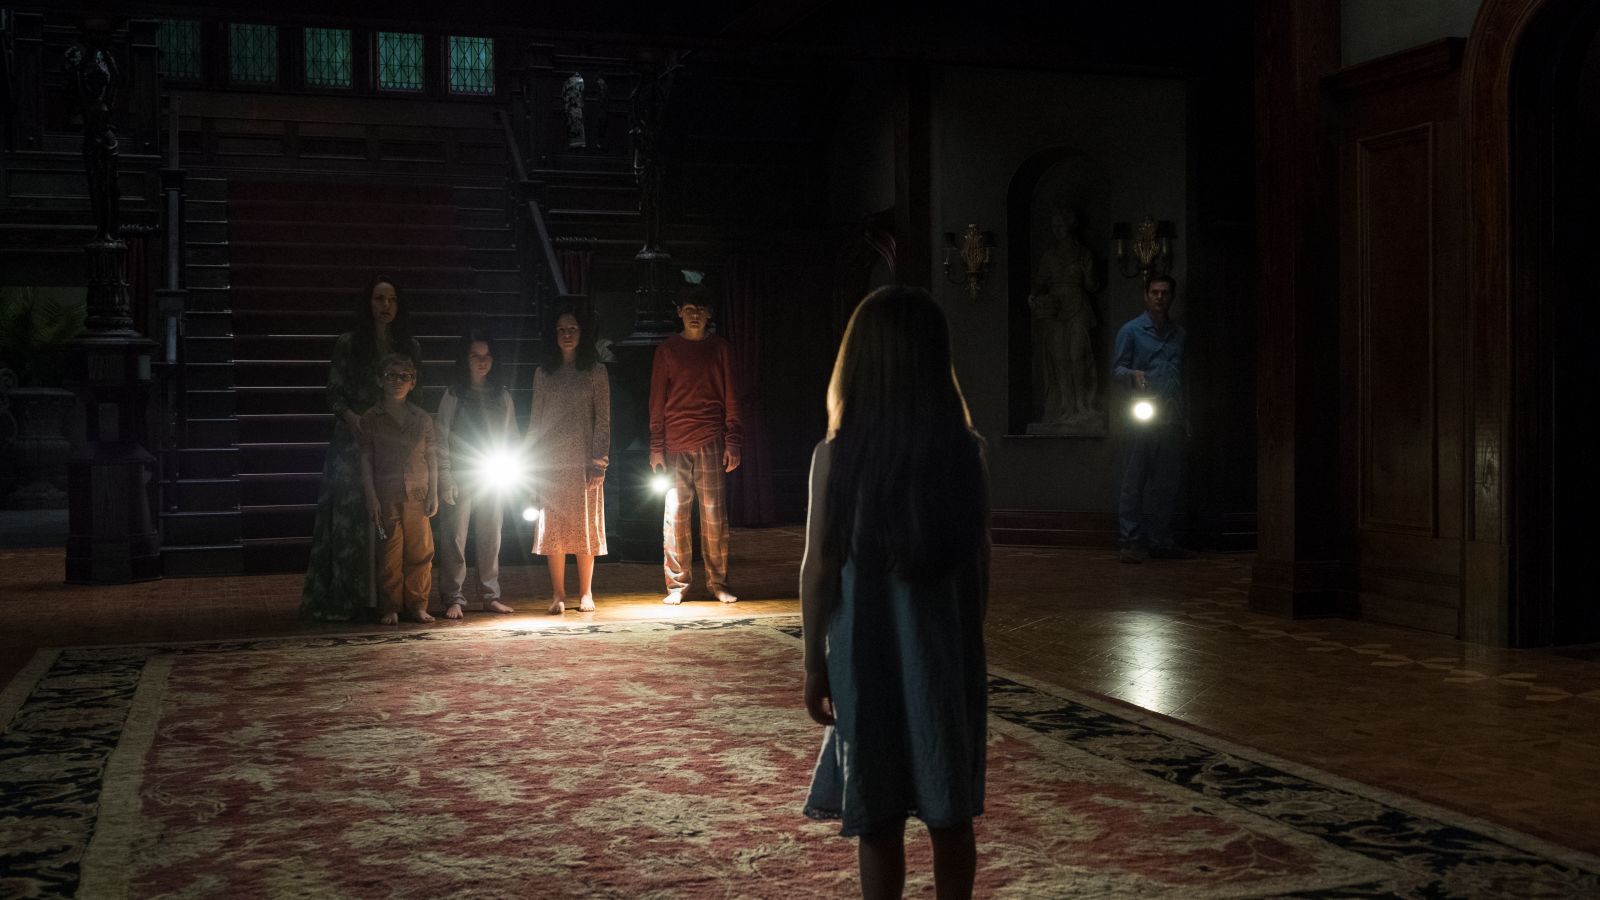 Can Ghosts Buy Drugs? The Haunting of Hill House (Eps. 6-10)